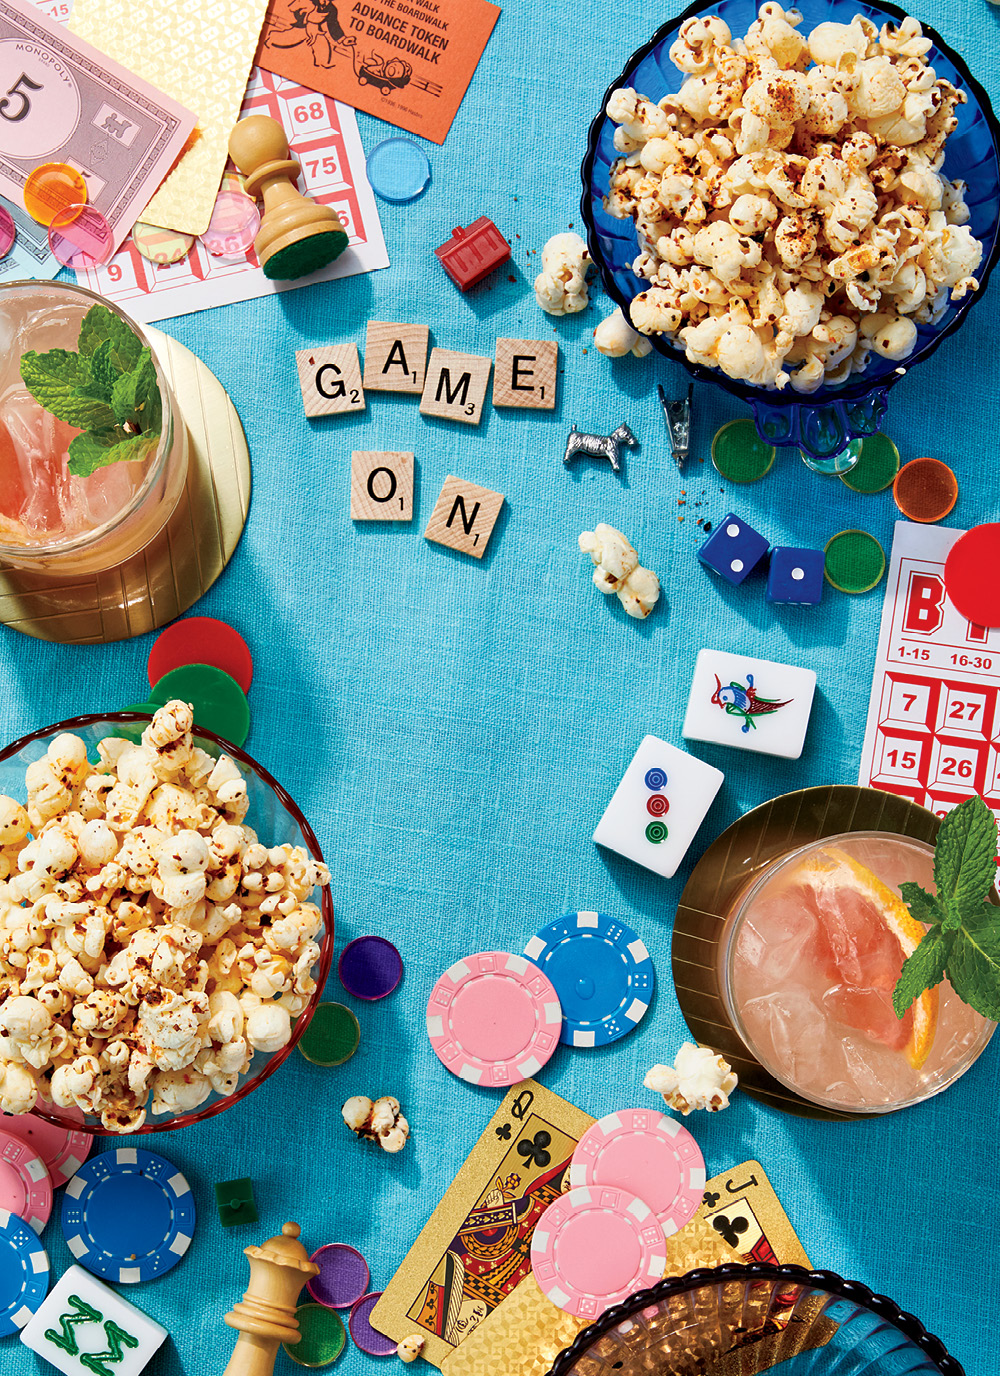 A furikake popcorn bowl, a grapefruit and sake cocktail, next to an array of game supplies (chess, cards, chips) with Scrabble letters spelling out "Game on" on a blue tablecloth